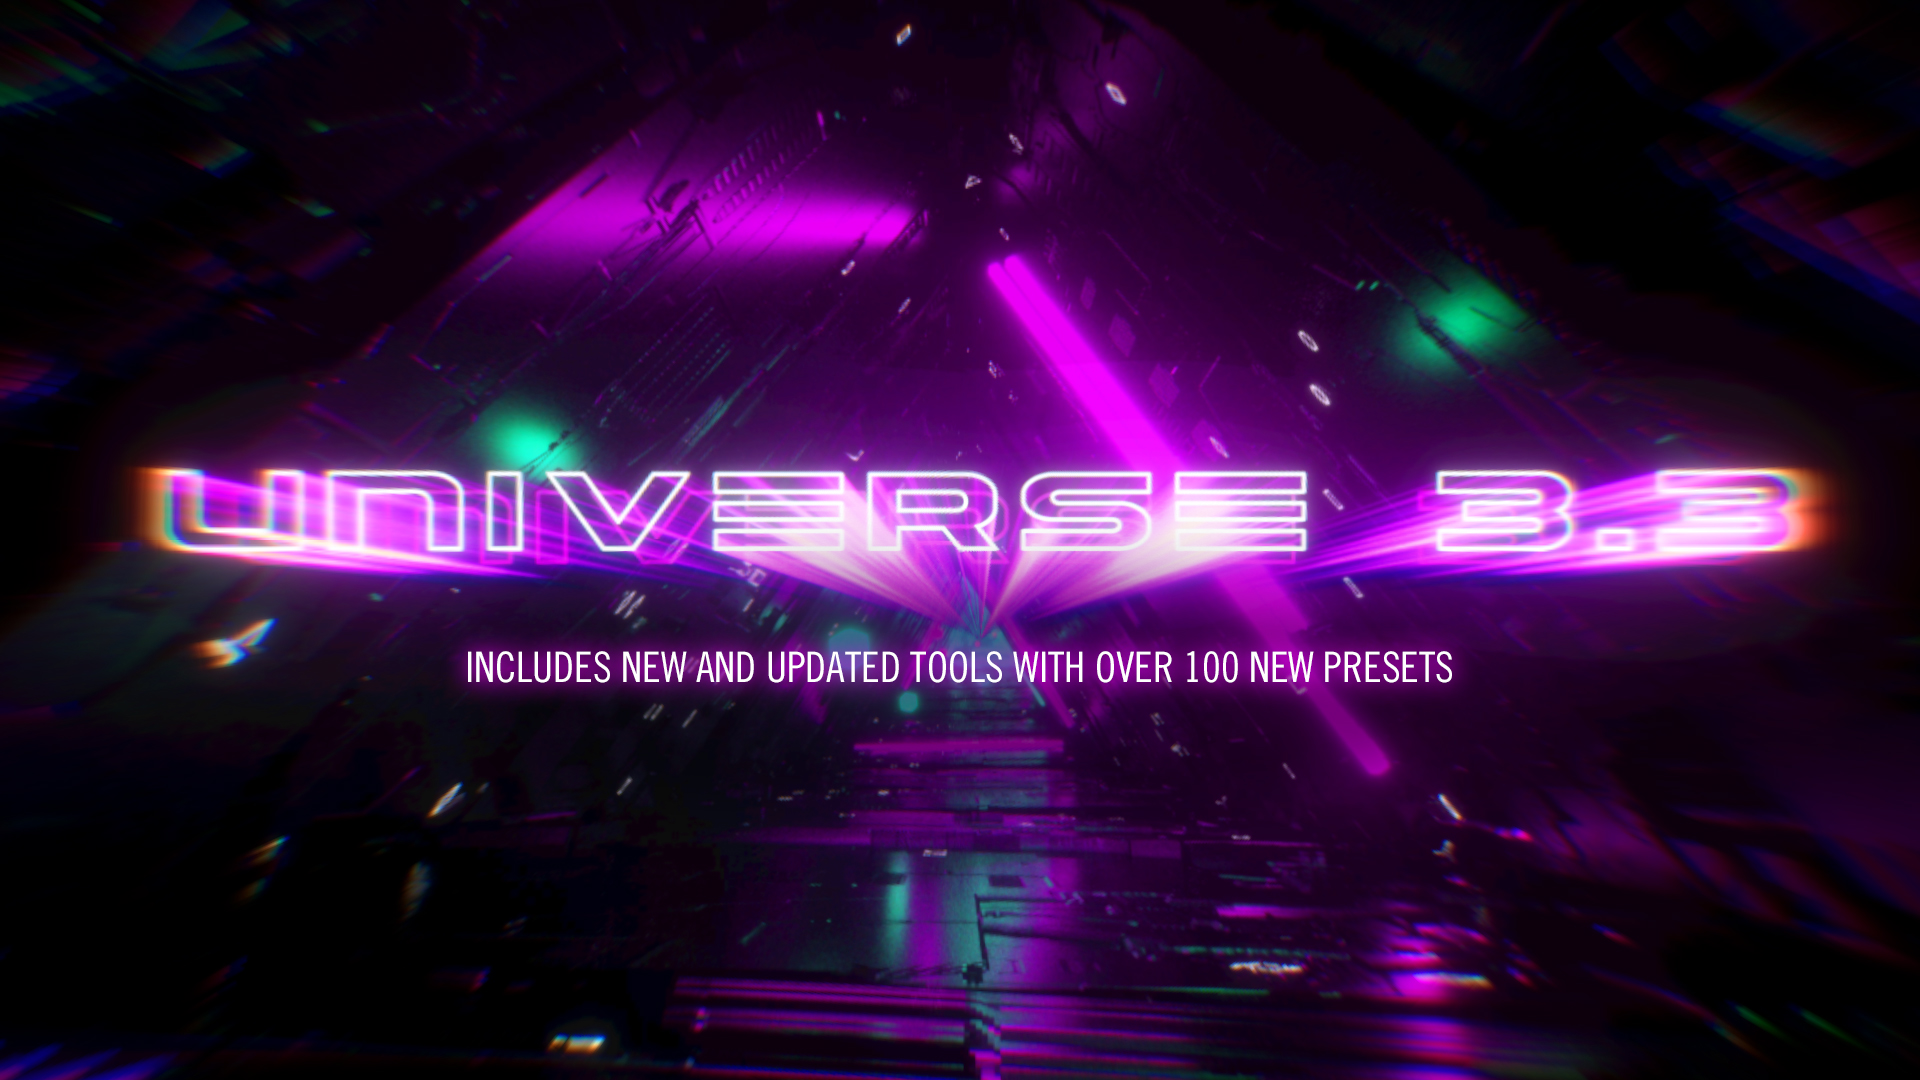 Red Giant Universe 3.3 Adds Tools Animated Light Trails and Powerful Blend Modes